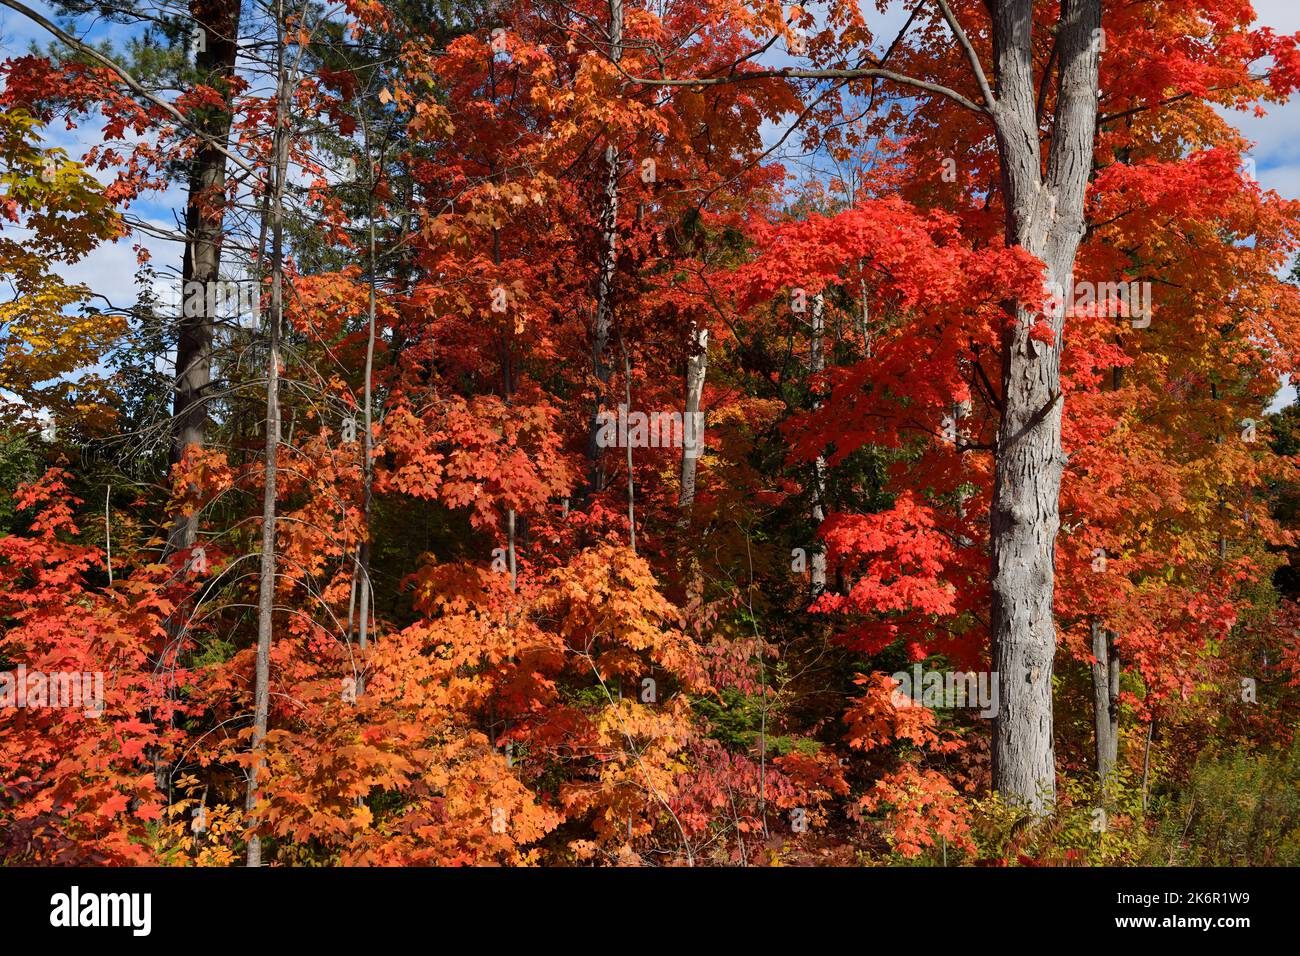 Red Maple leaves on trees in a sunny Autumn forest with blue sky in Canada Stock Photo